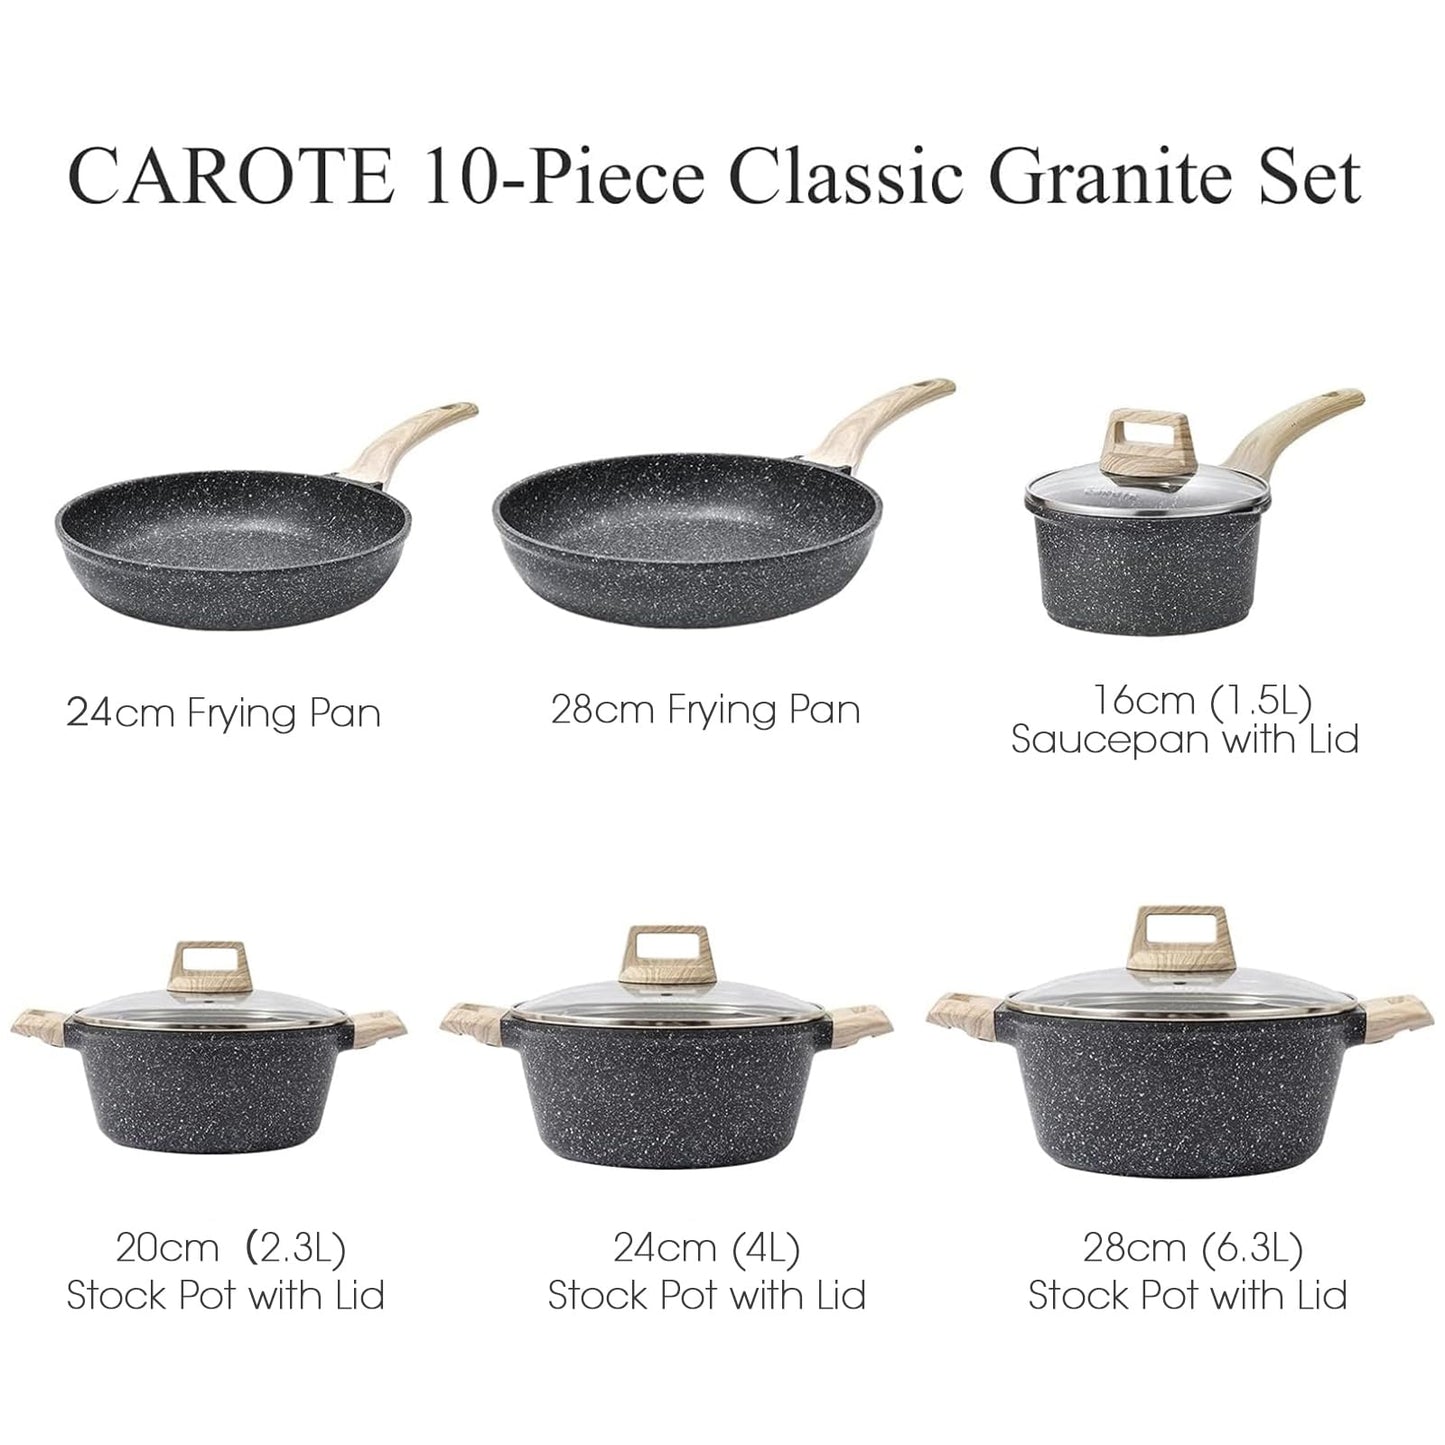 CAROTE Nonstick Granite Cookware Sets, 10 Pcs Pots and Pans Set, Non-Stick Kitchen Induction Cooking Set with Frying Pans, Saucepan